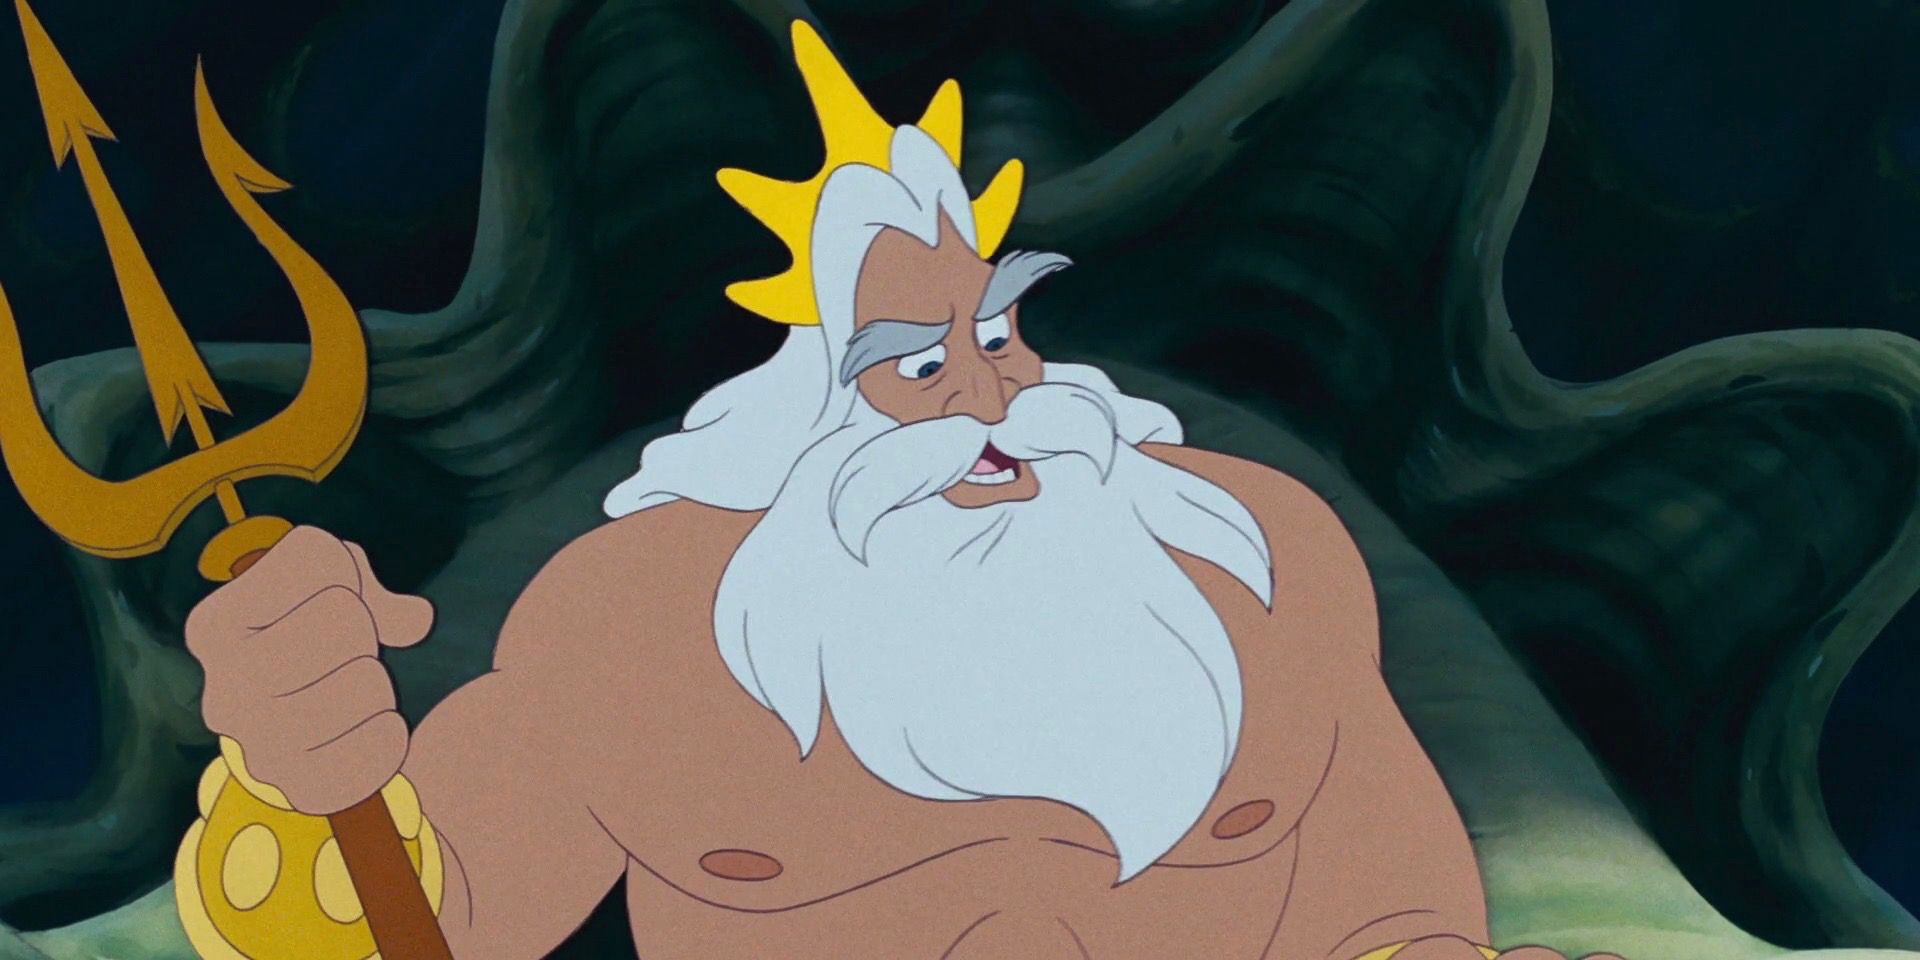 King Triton from The Little Mermaid holding his trident